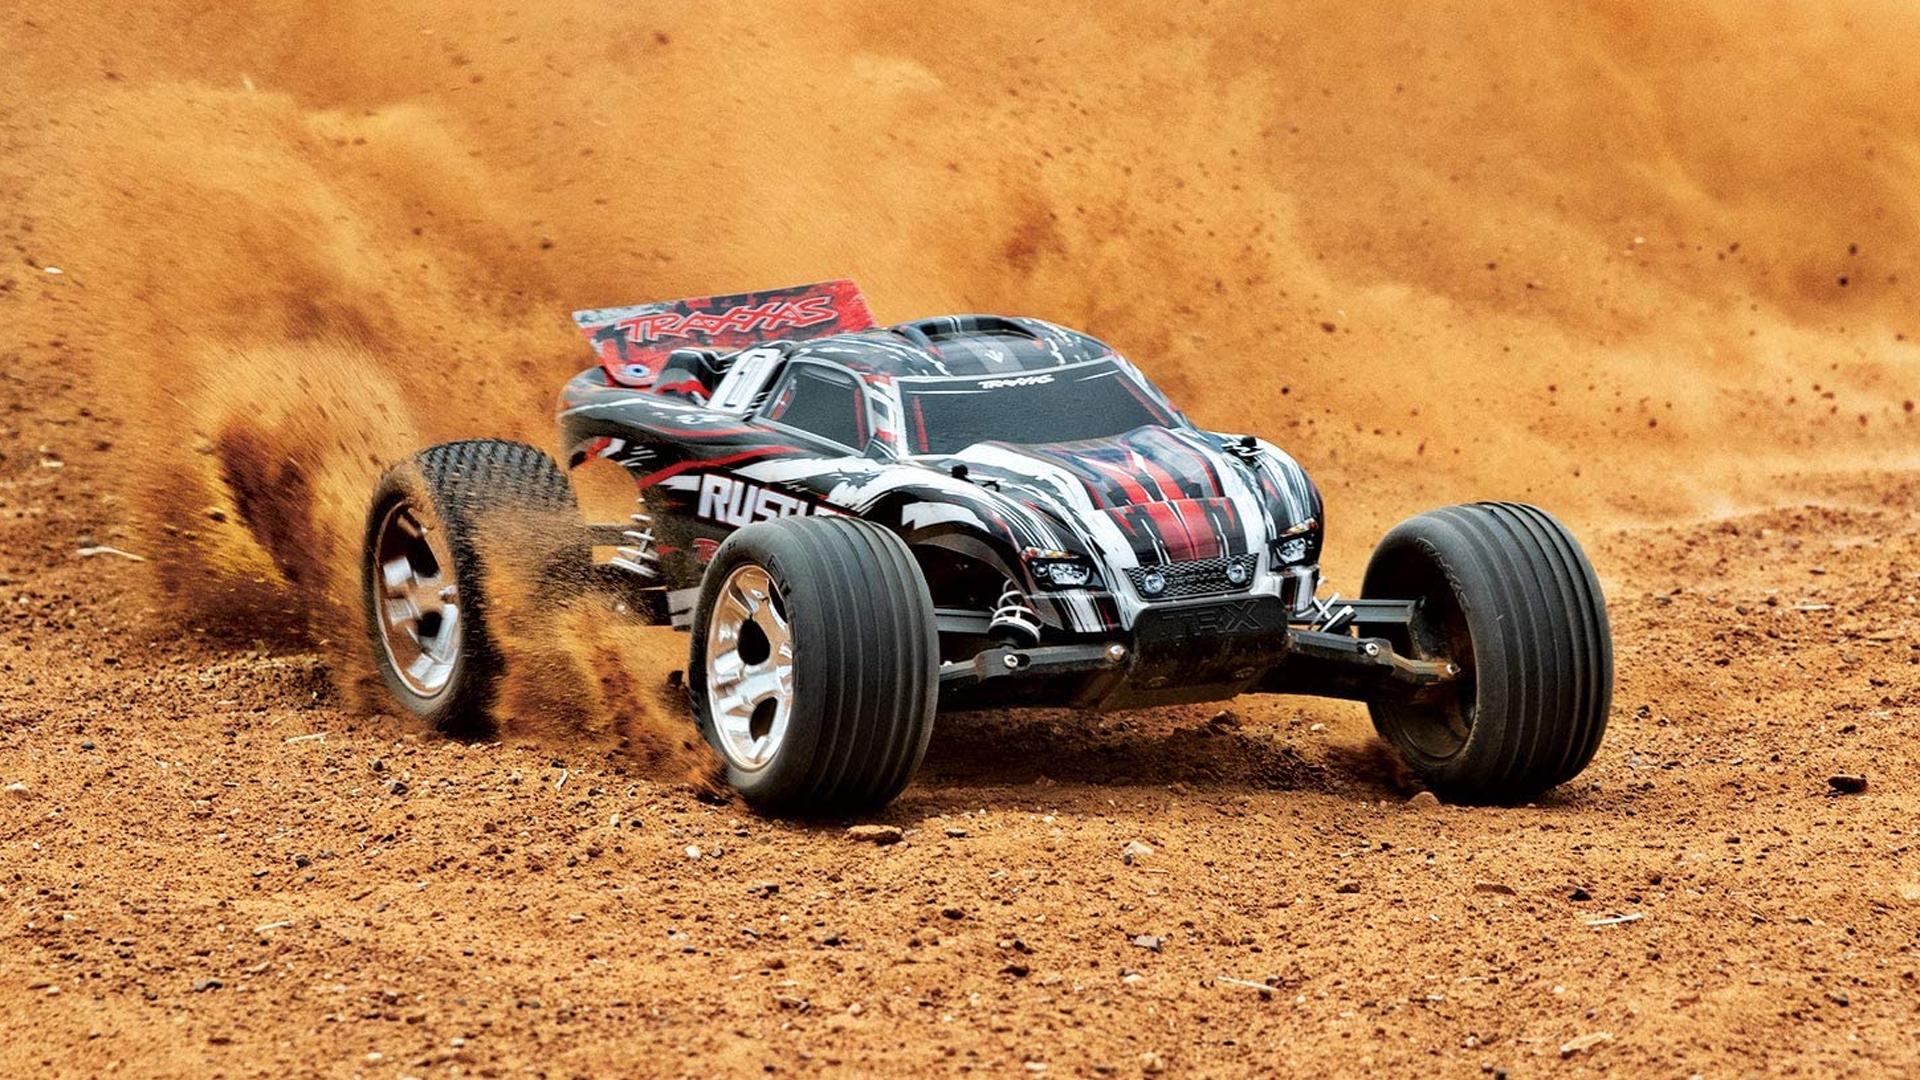 New Electric Rc Cars: Top Brands and Features of New Electric RC Cars